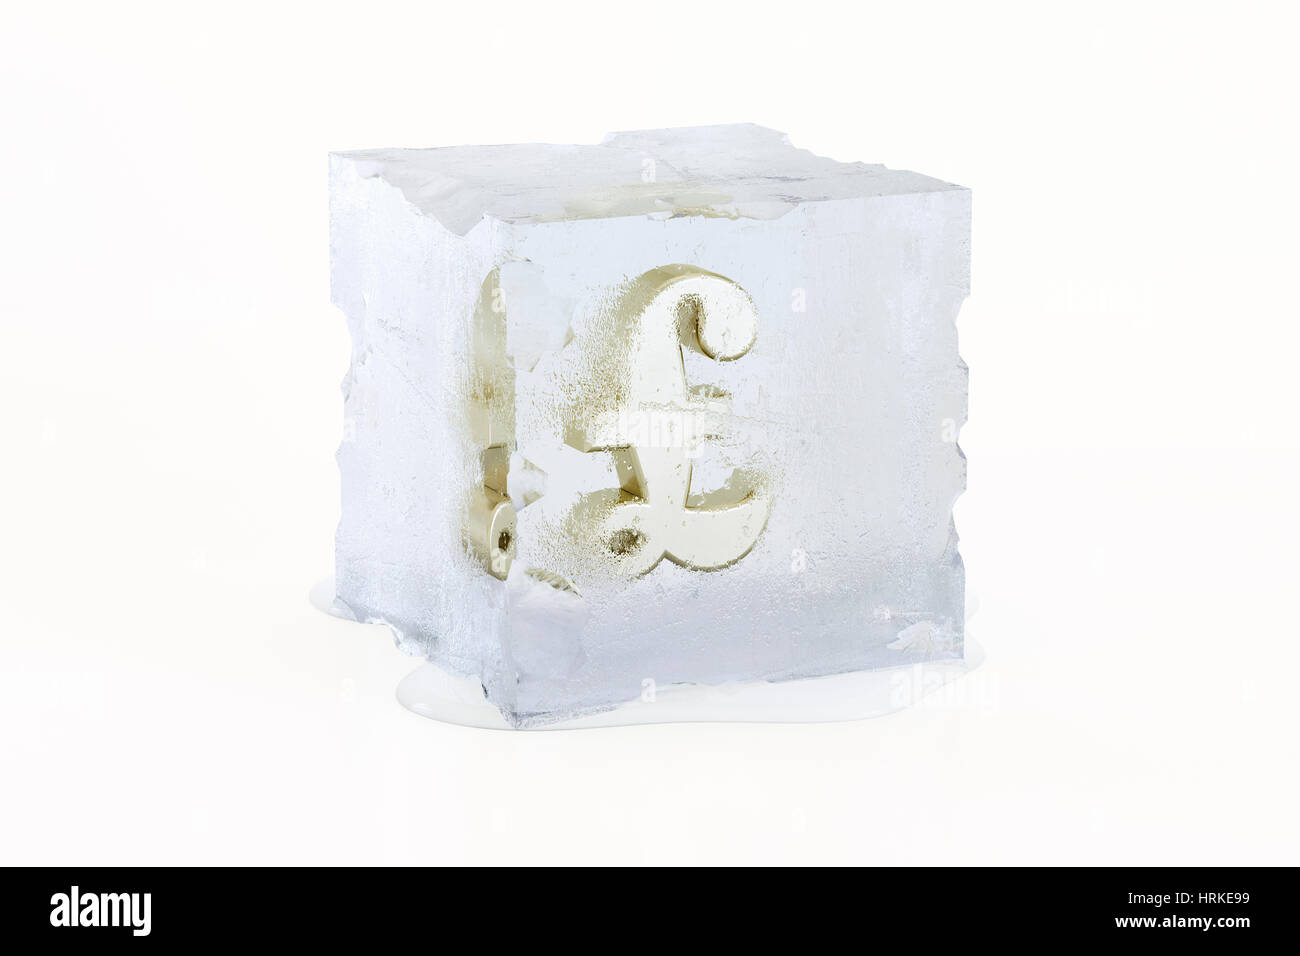 Golden British Pound Sterling concept symbol frozen in a slowly melting ice cube isolated on a white background Stock Photo